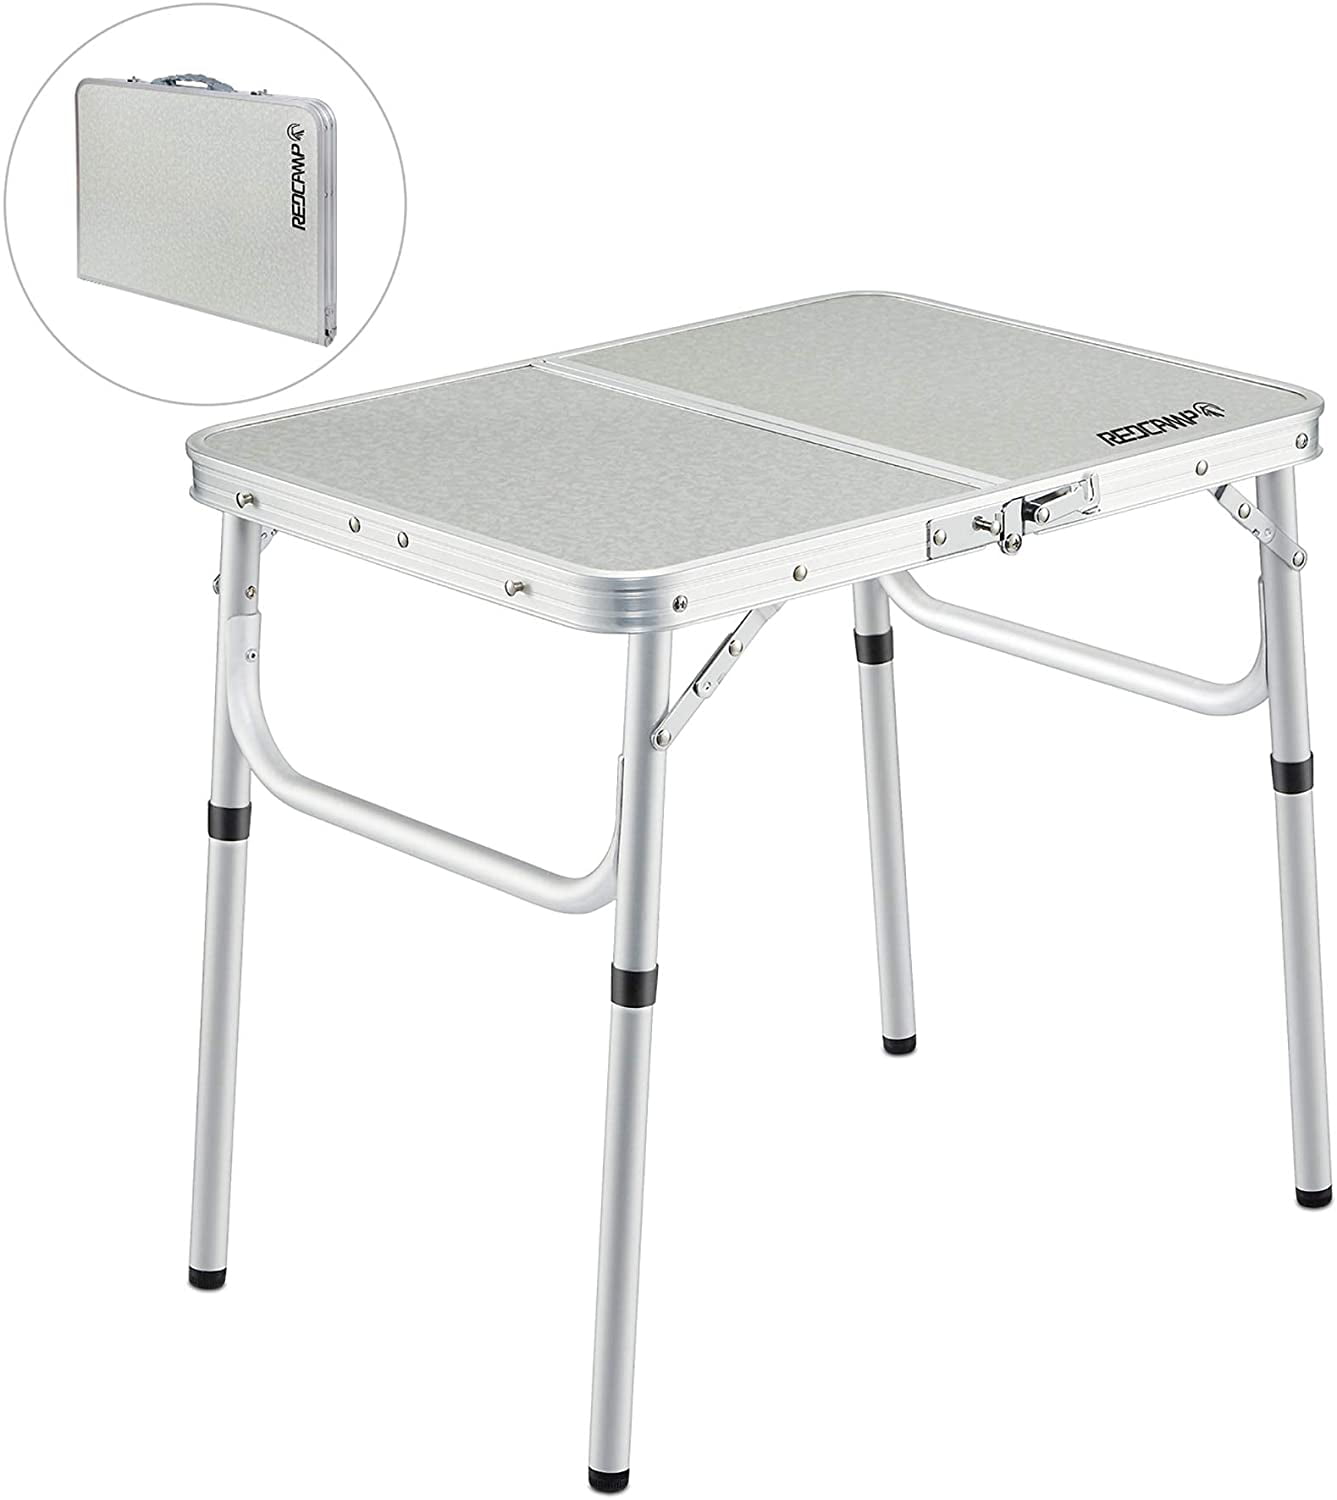 Outdoor Picnic Camping Backpacking Beach Patio Collapsible Foldable Table Outry Lightweight Aluminum Folding Table Silver, Large - Unfolded: 27 x 18.3 x 15.7 Portable Camp Table 